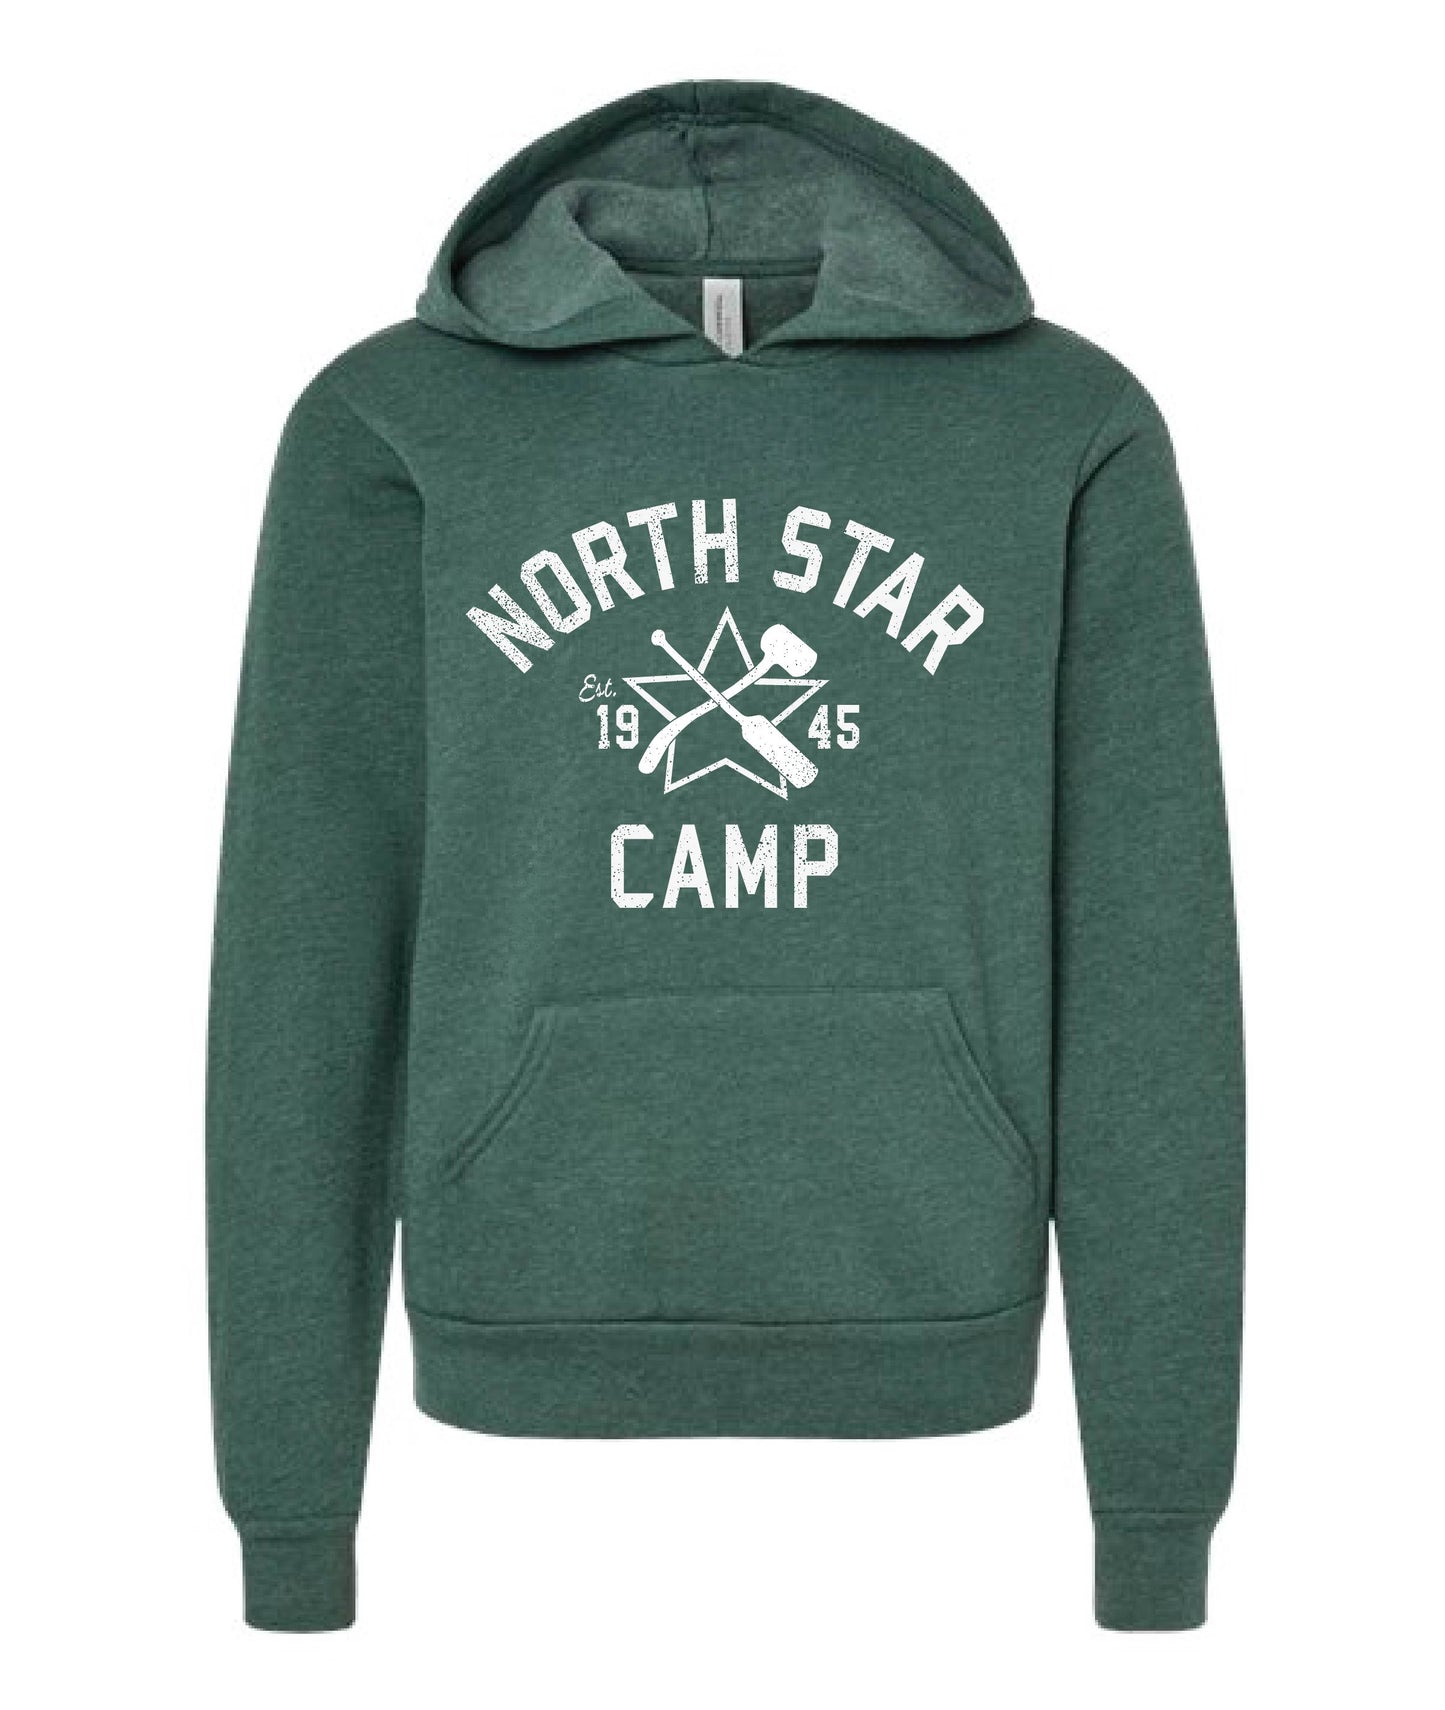 NSC Youth Hoodie